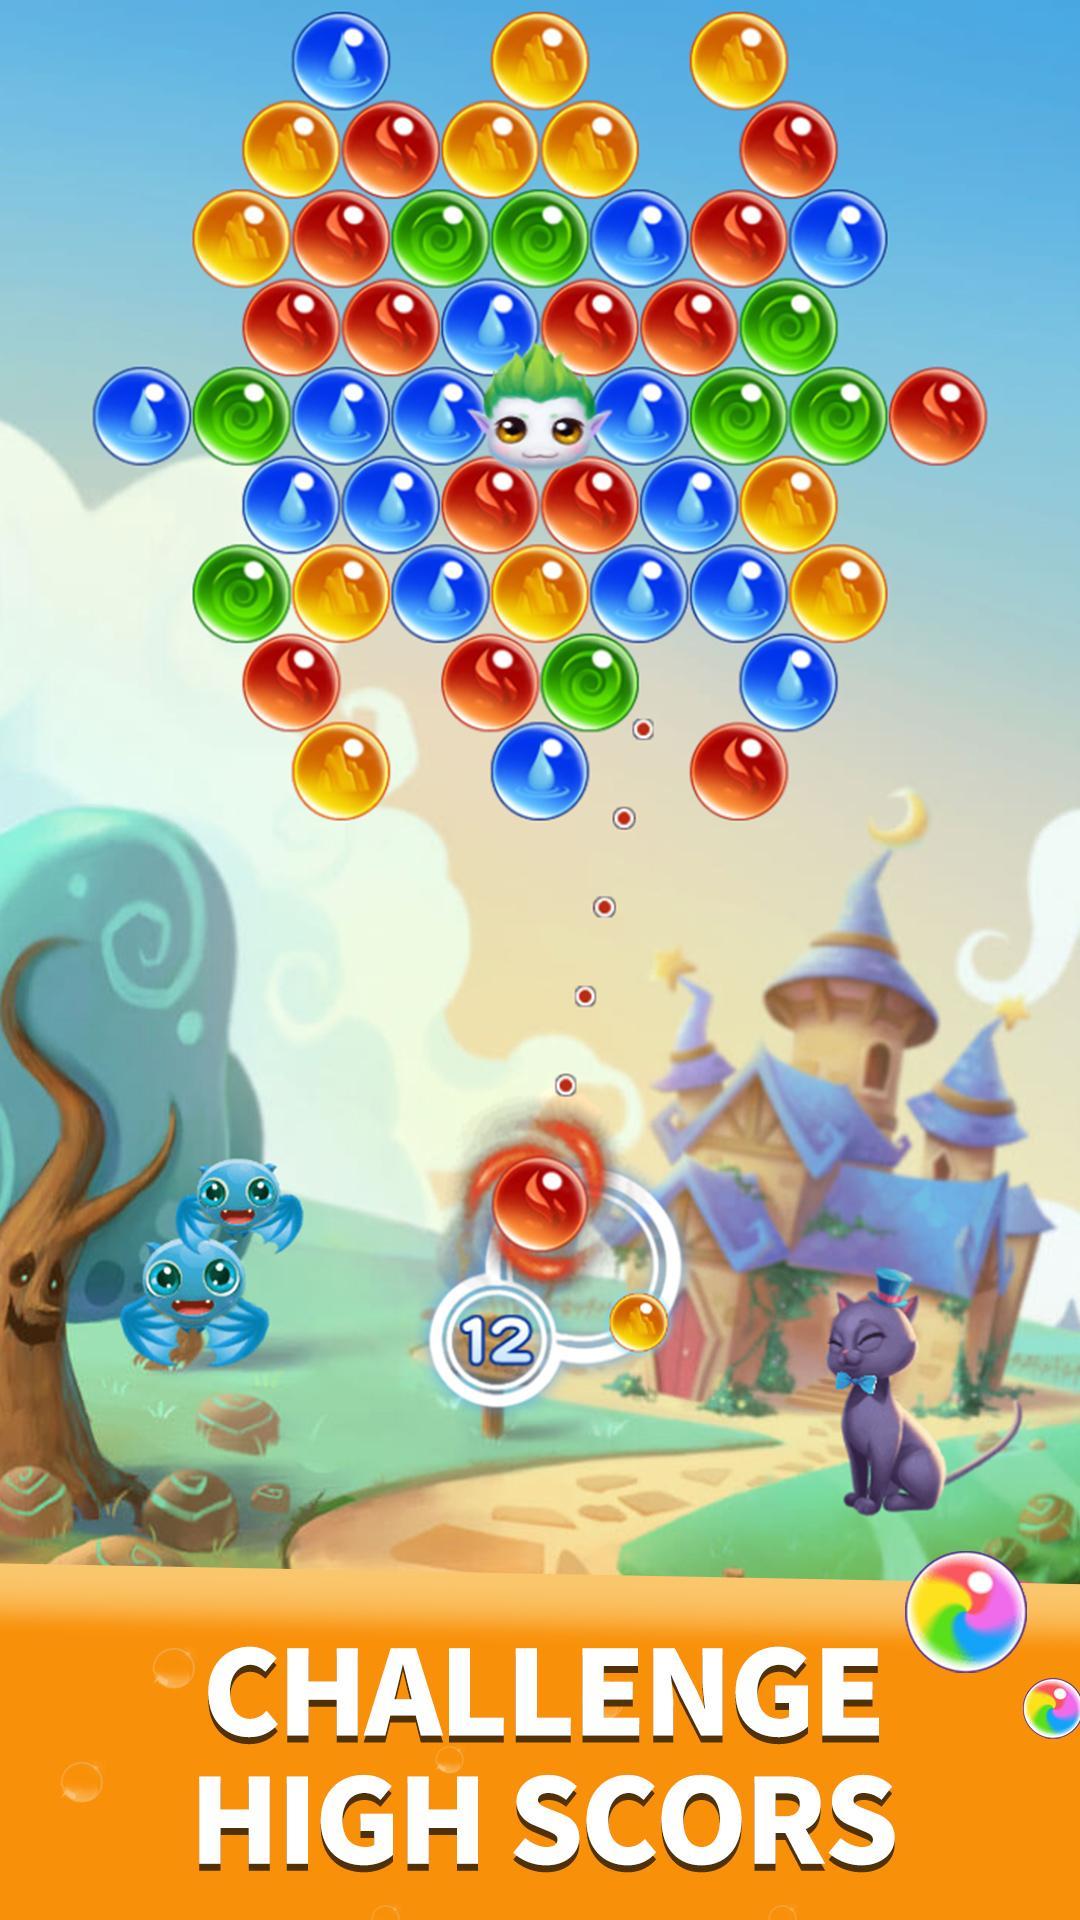 Magic POP-best bubble shooter game for Android - APK Download